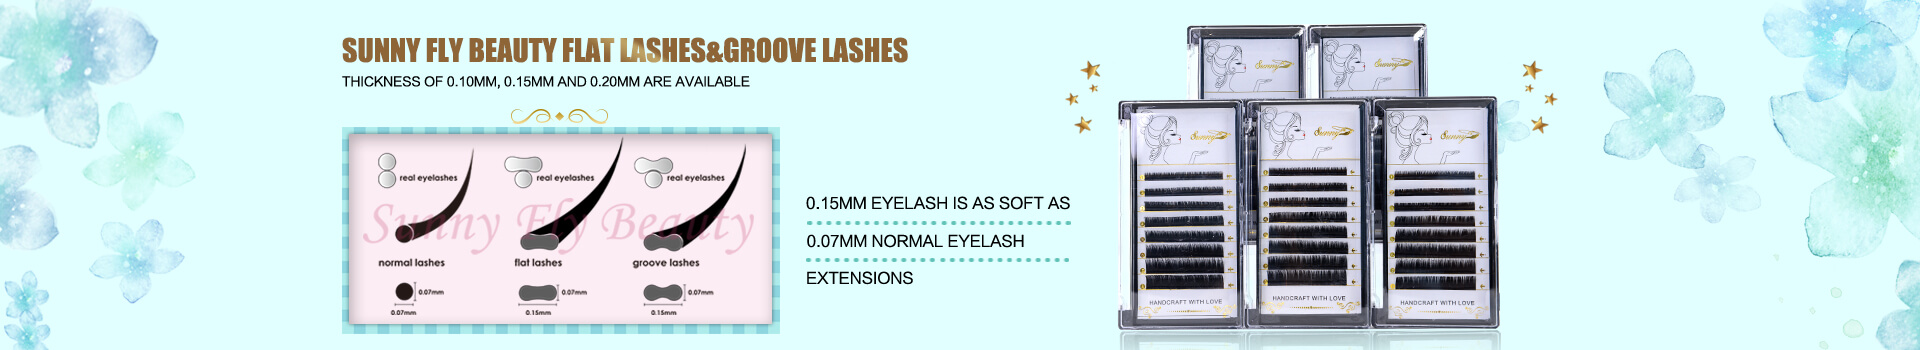 Lashes Flat & Groove Lashes